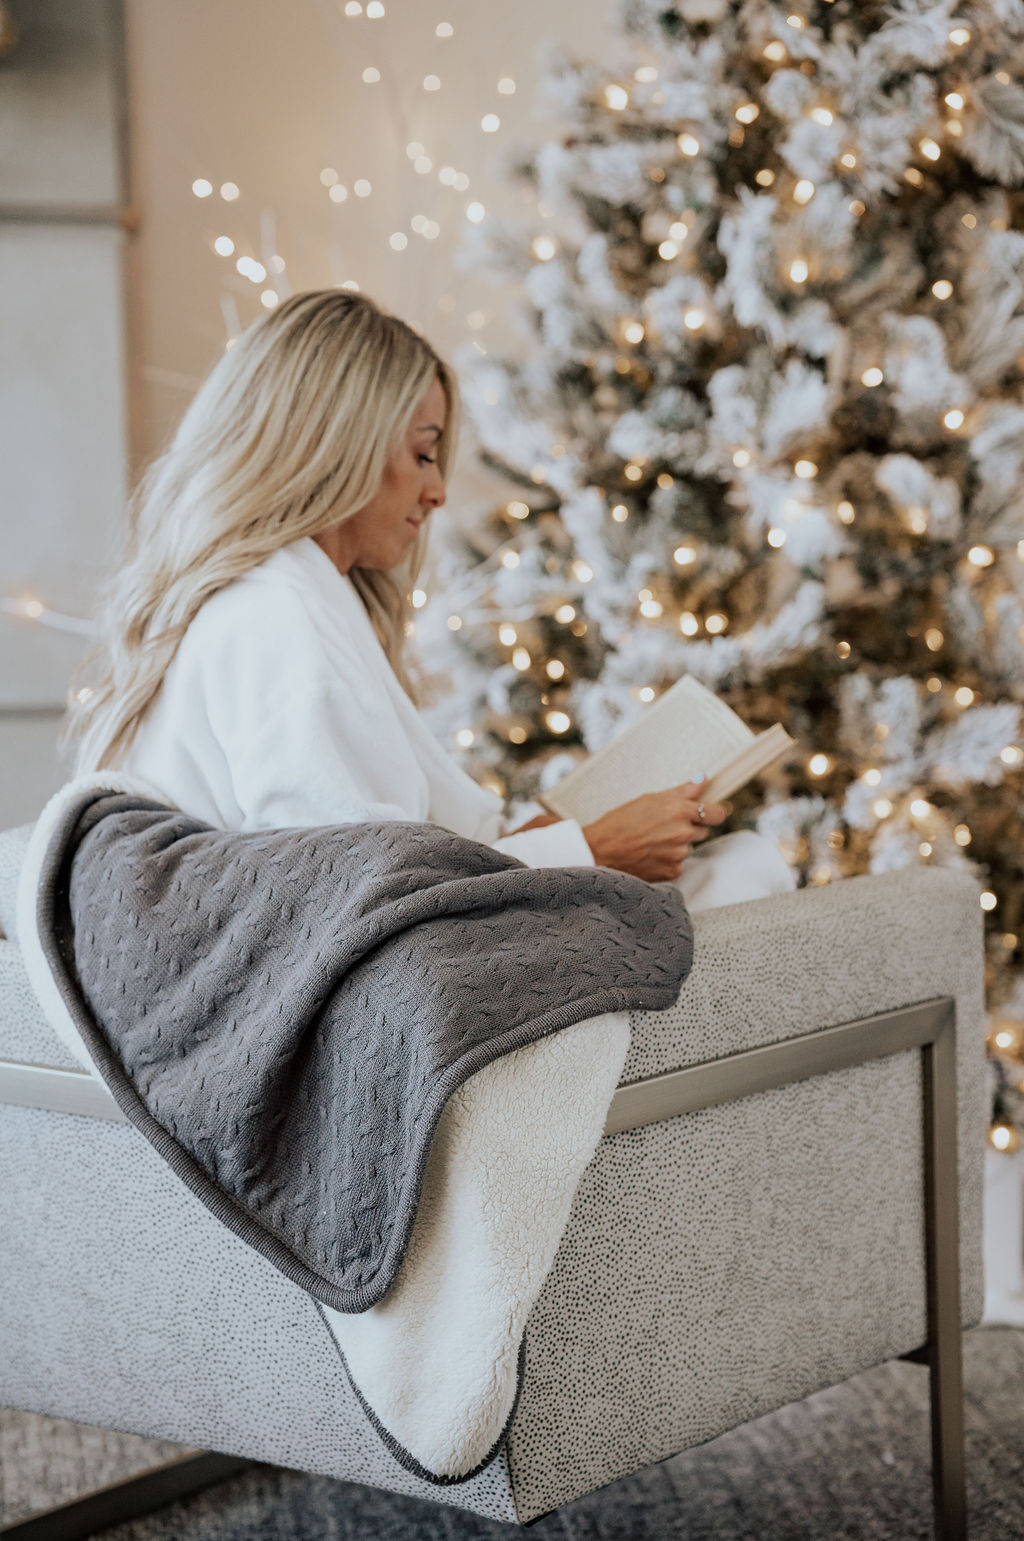 model wearing cariloha robe while reading a book next to a christmas tree